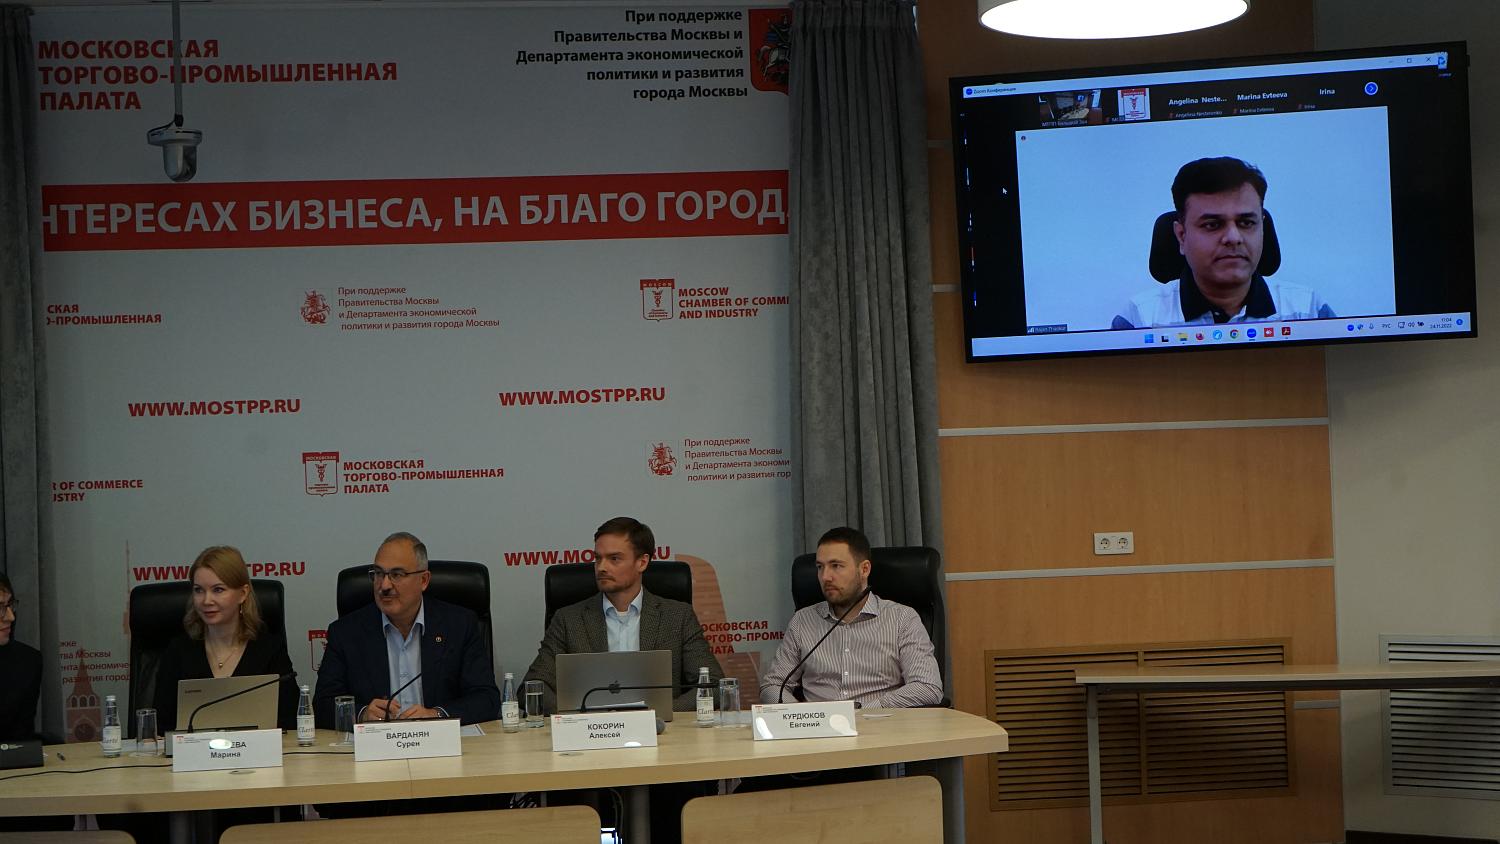 Experts discussed the prospects of doing business with India in the Moscow Chamber of Commerce and Industry